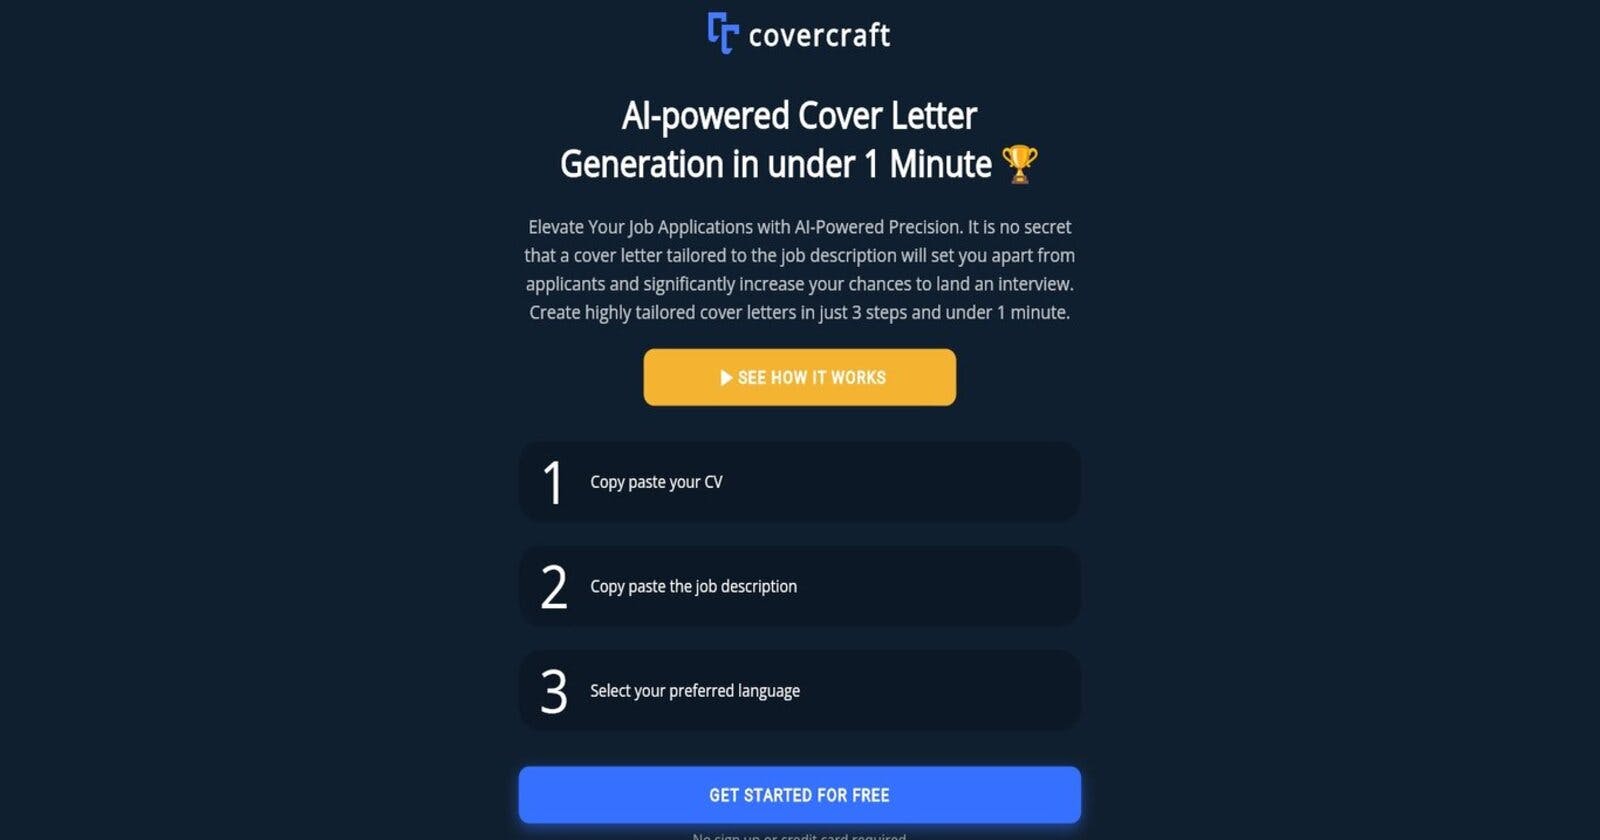 Covercraft: AI-powered Cover Letter Generation in under 1 Minute